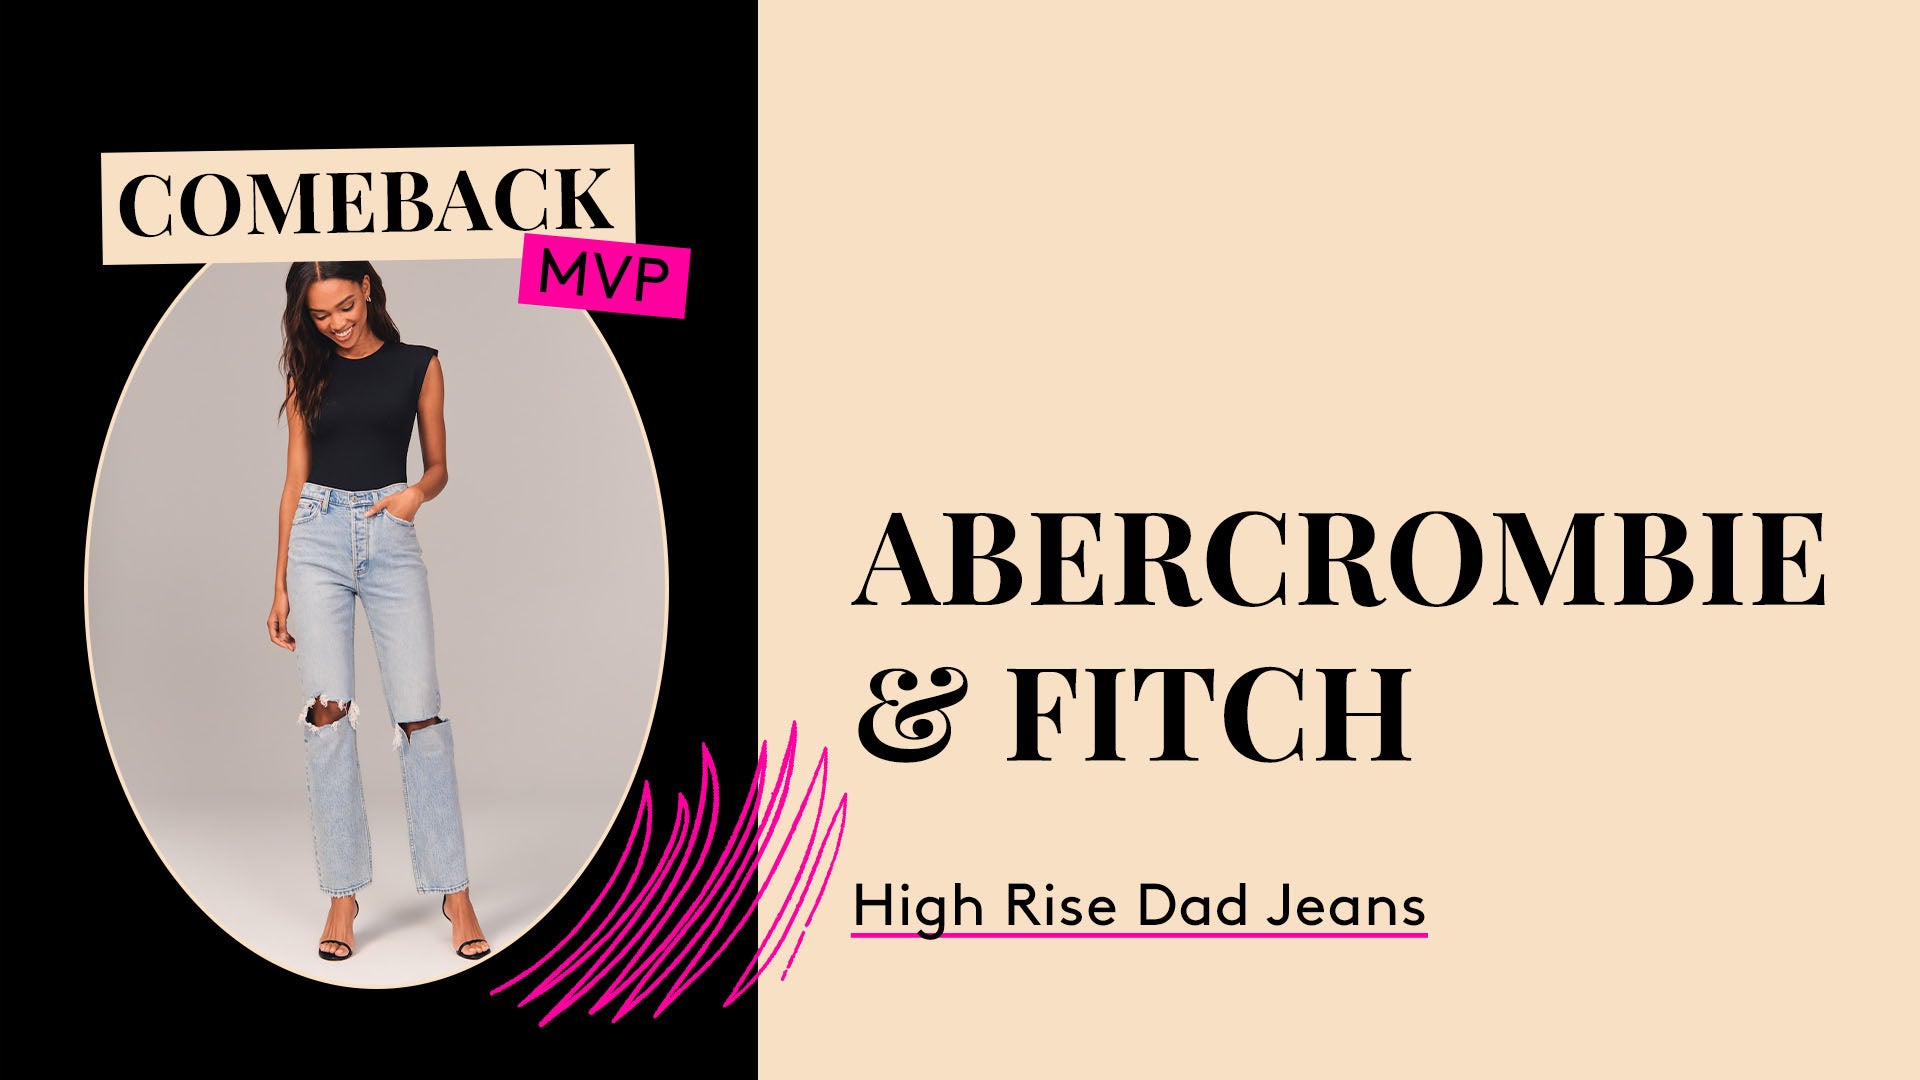 Comeback MVP. Abercrombie & Fitch High Rise Dad Jeans.